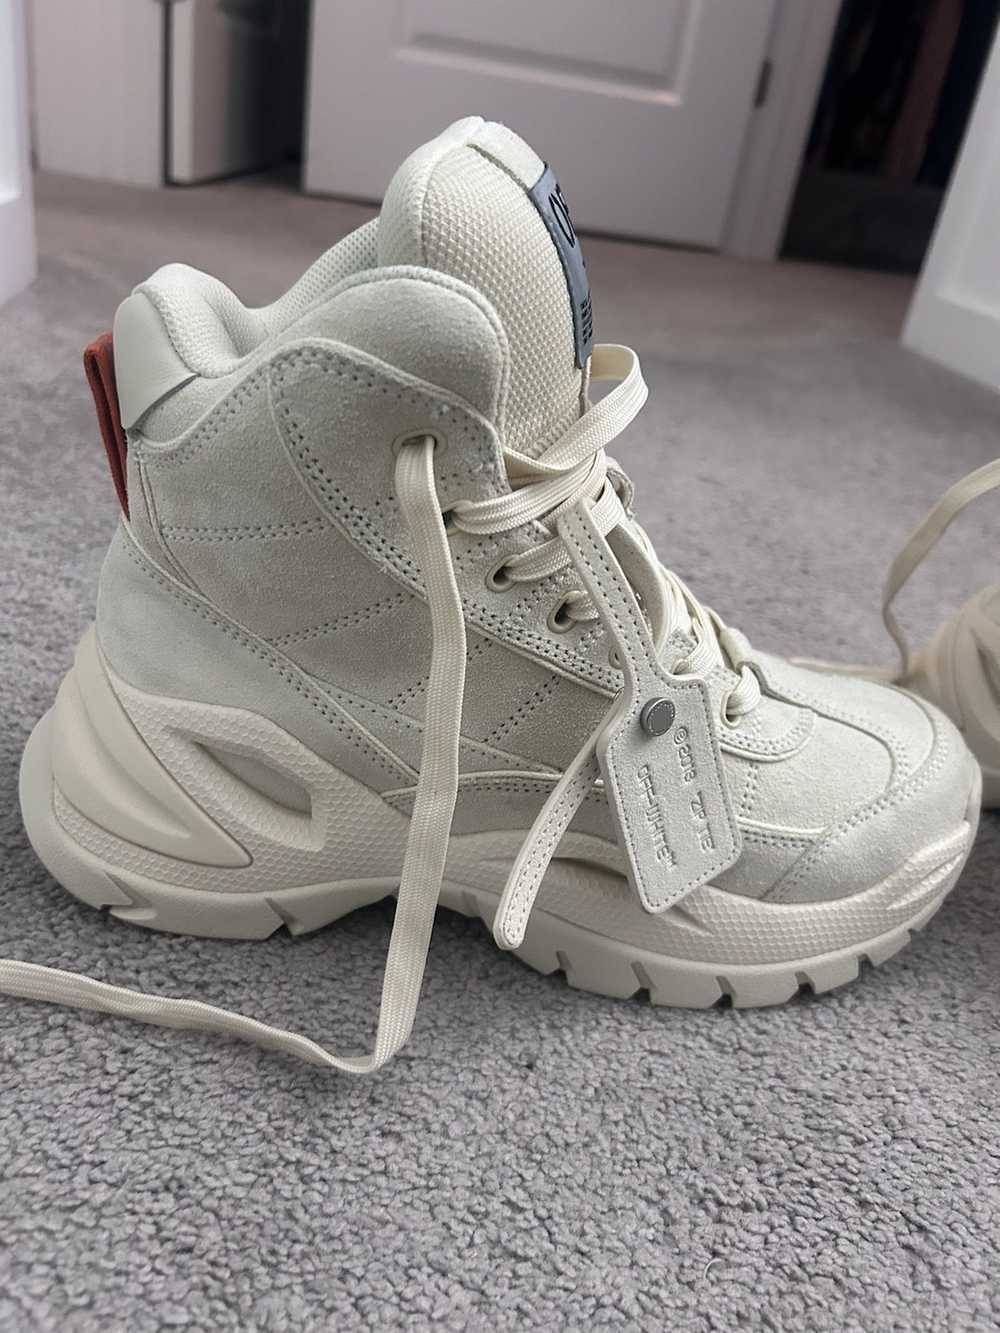 Off-White Hiker High Top Sneakers - image 11